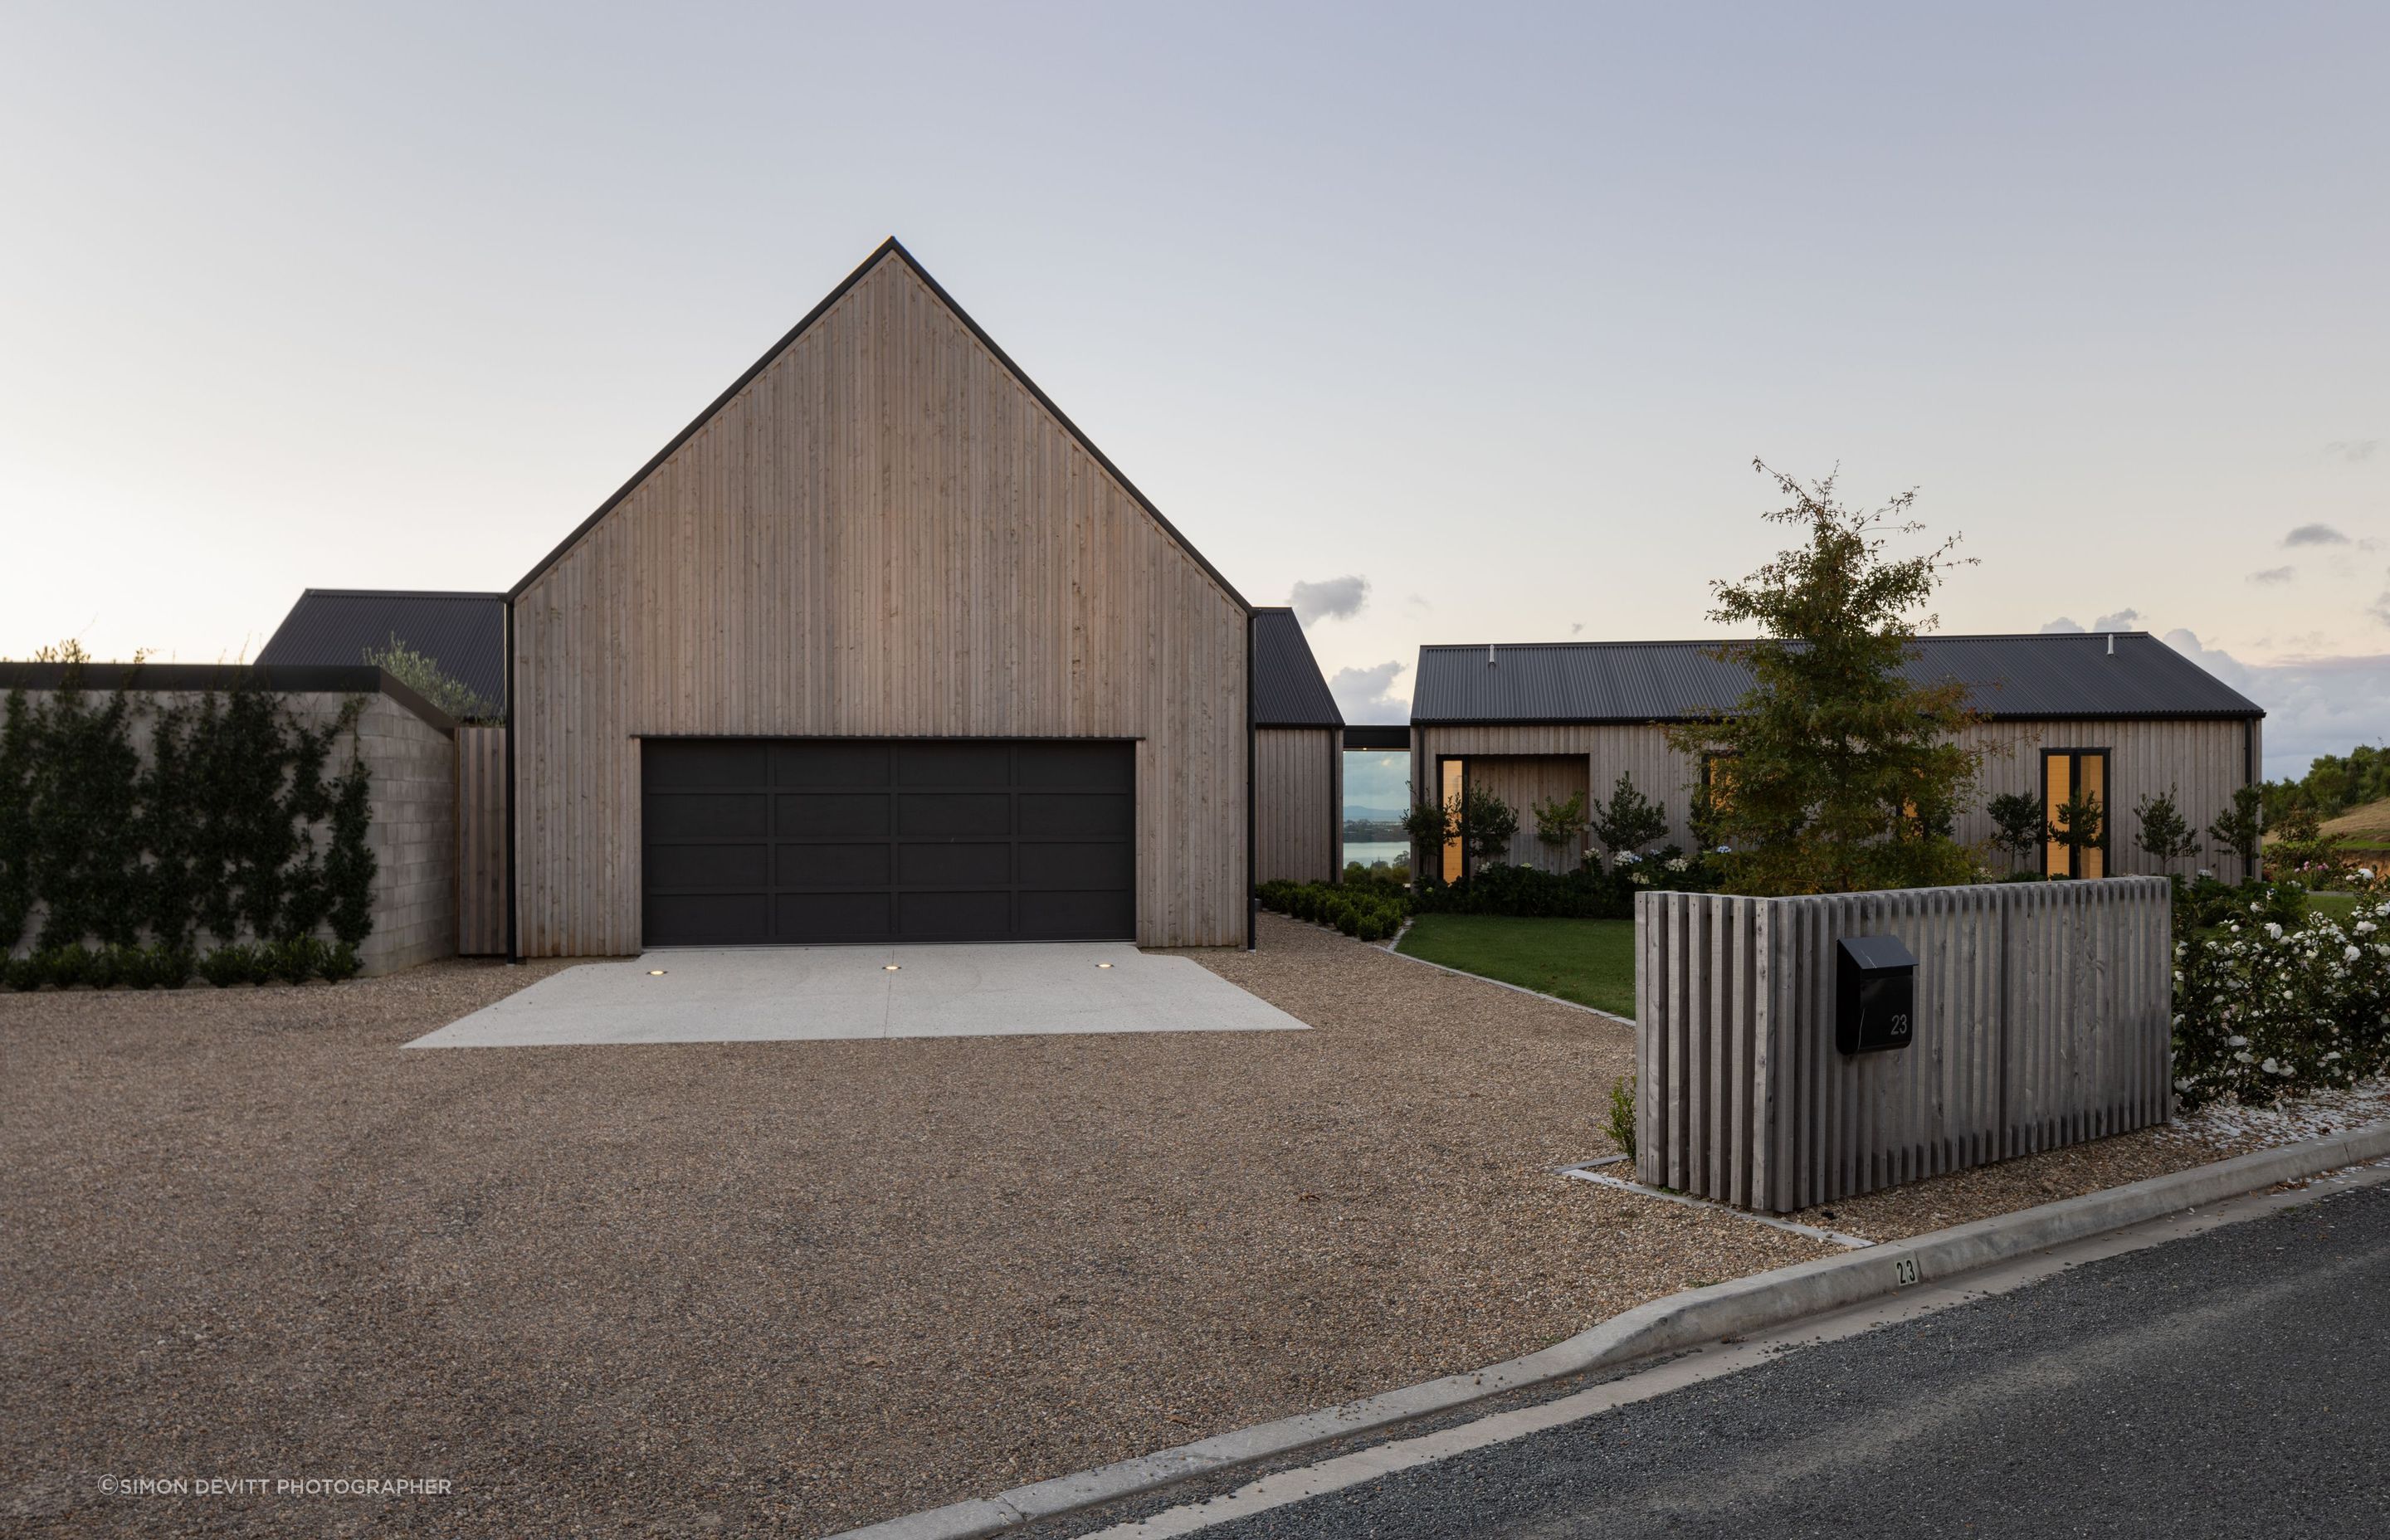 The gable form of the garage pod cuts a distinct shape upon arrival.